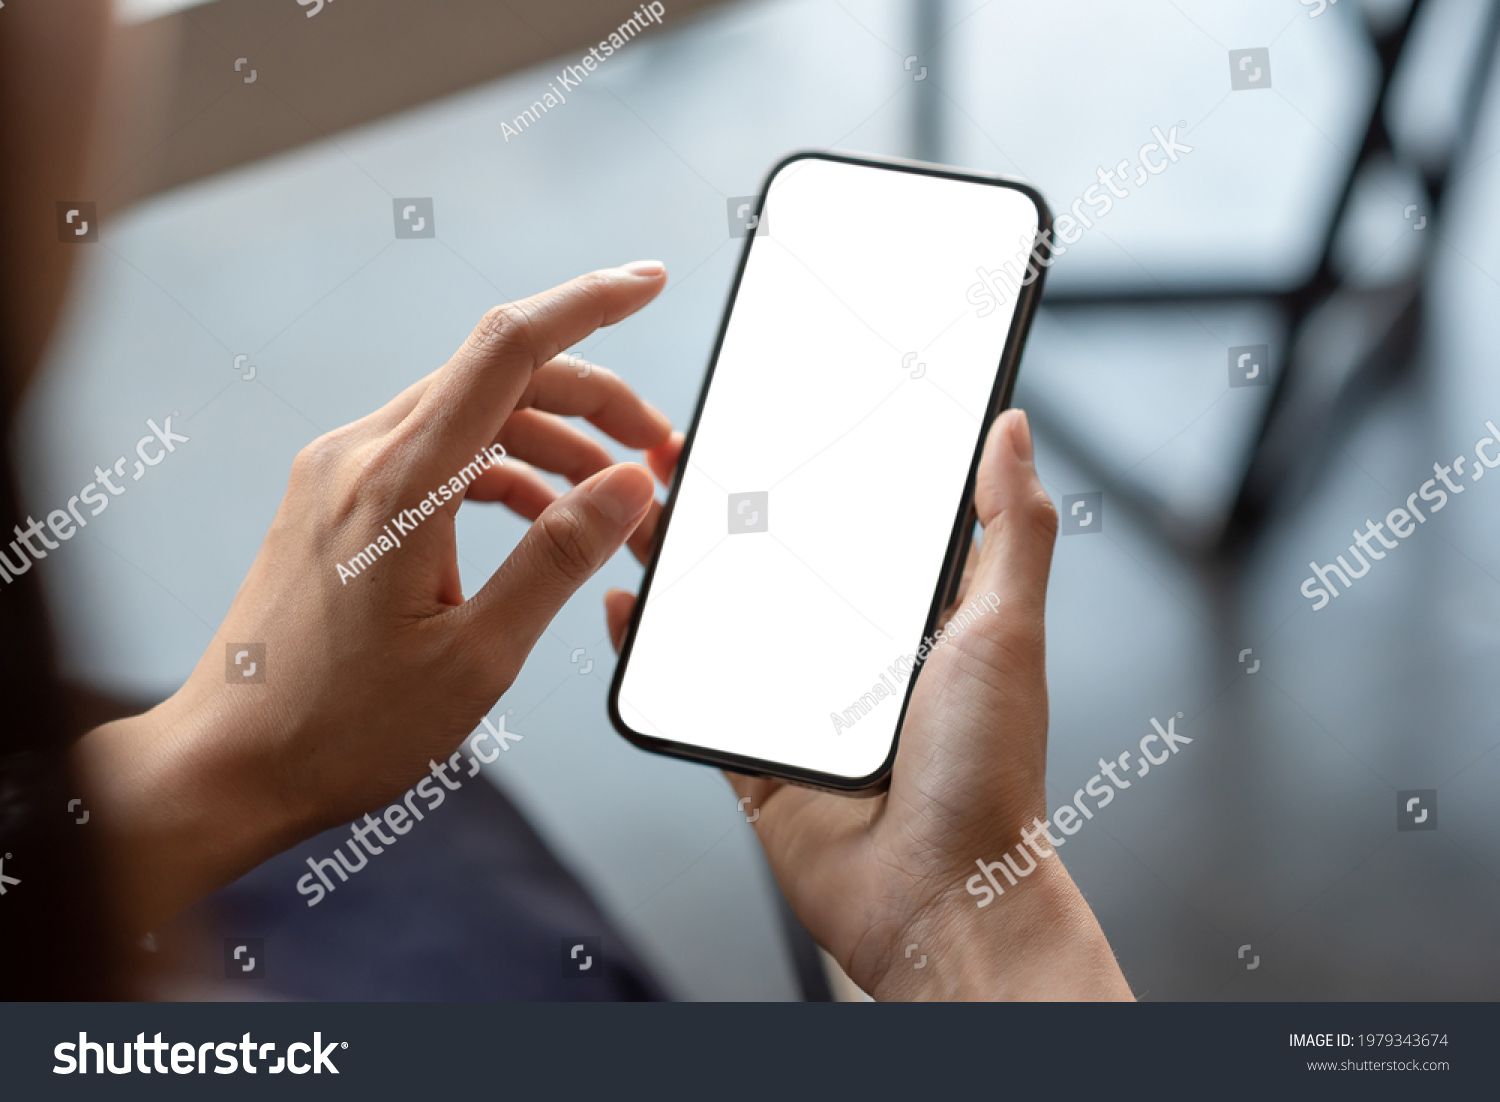 Close-up of a businessman hand holding a smartphone white screen is blank the background is blurred.Mockup. #1979343674